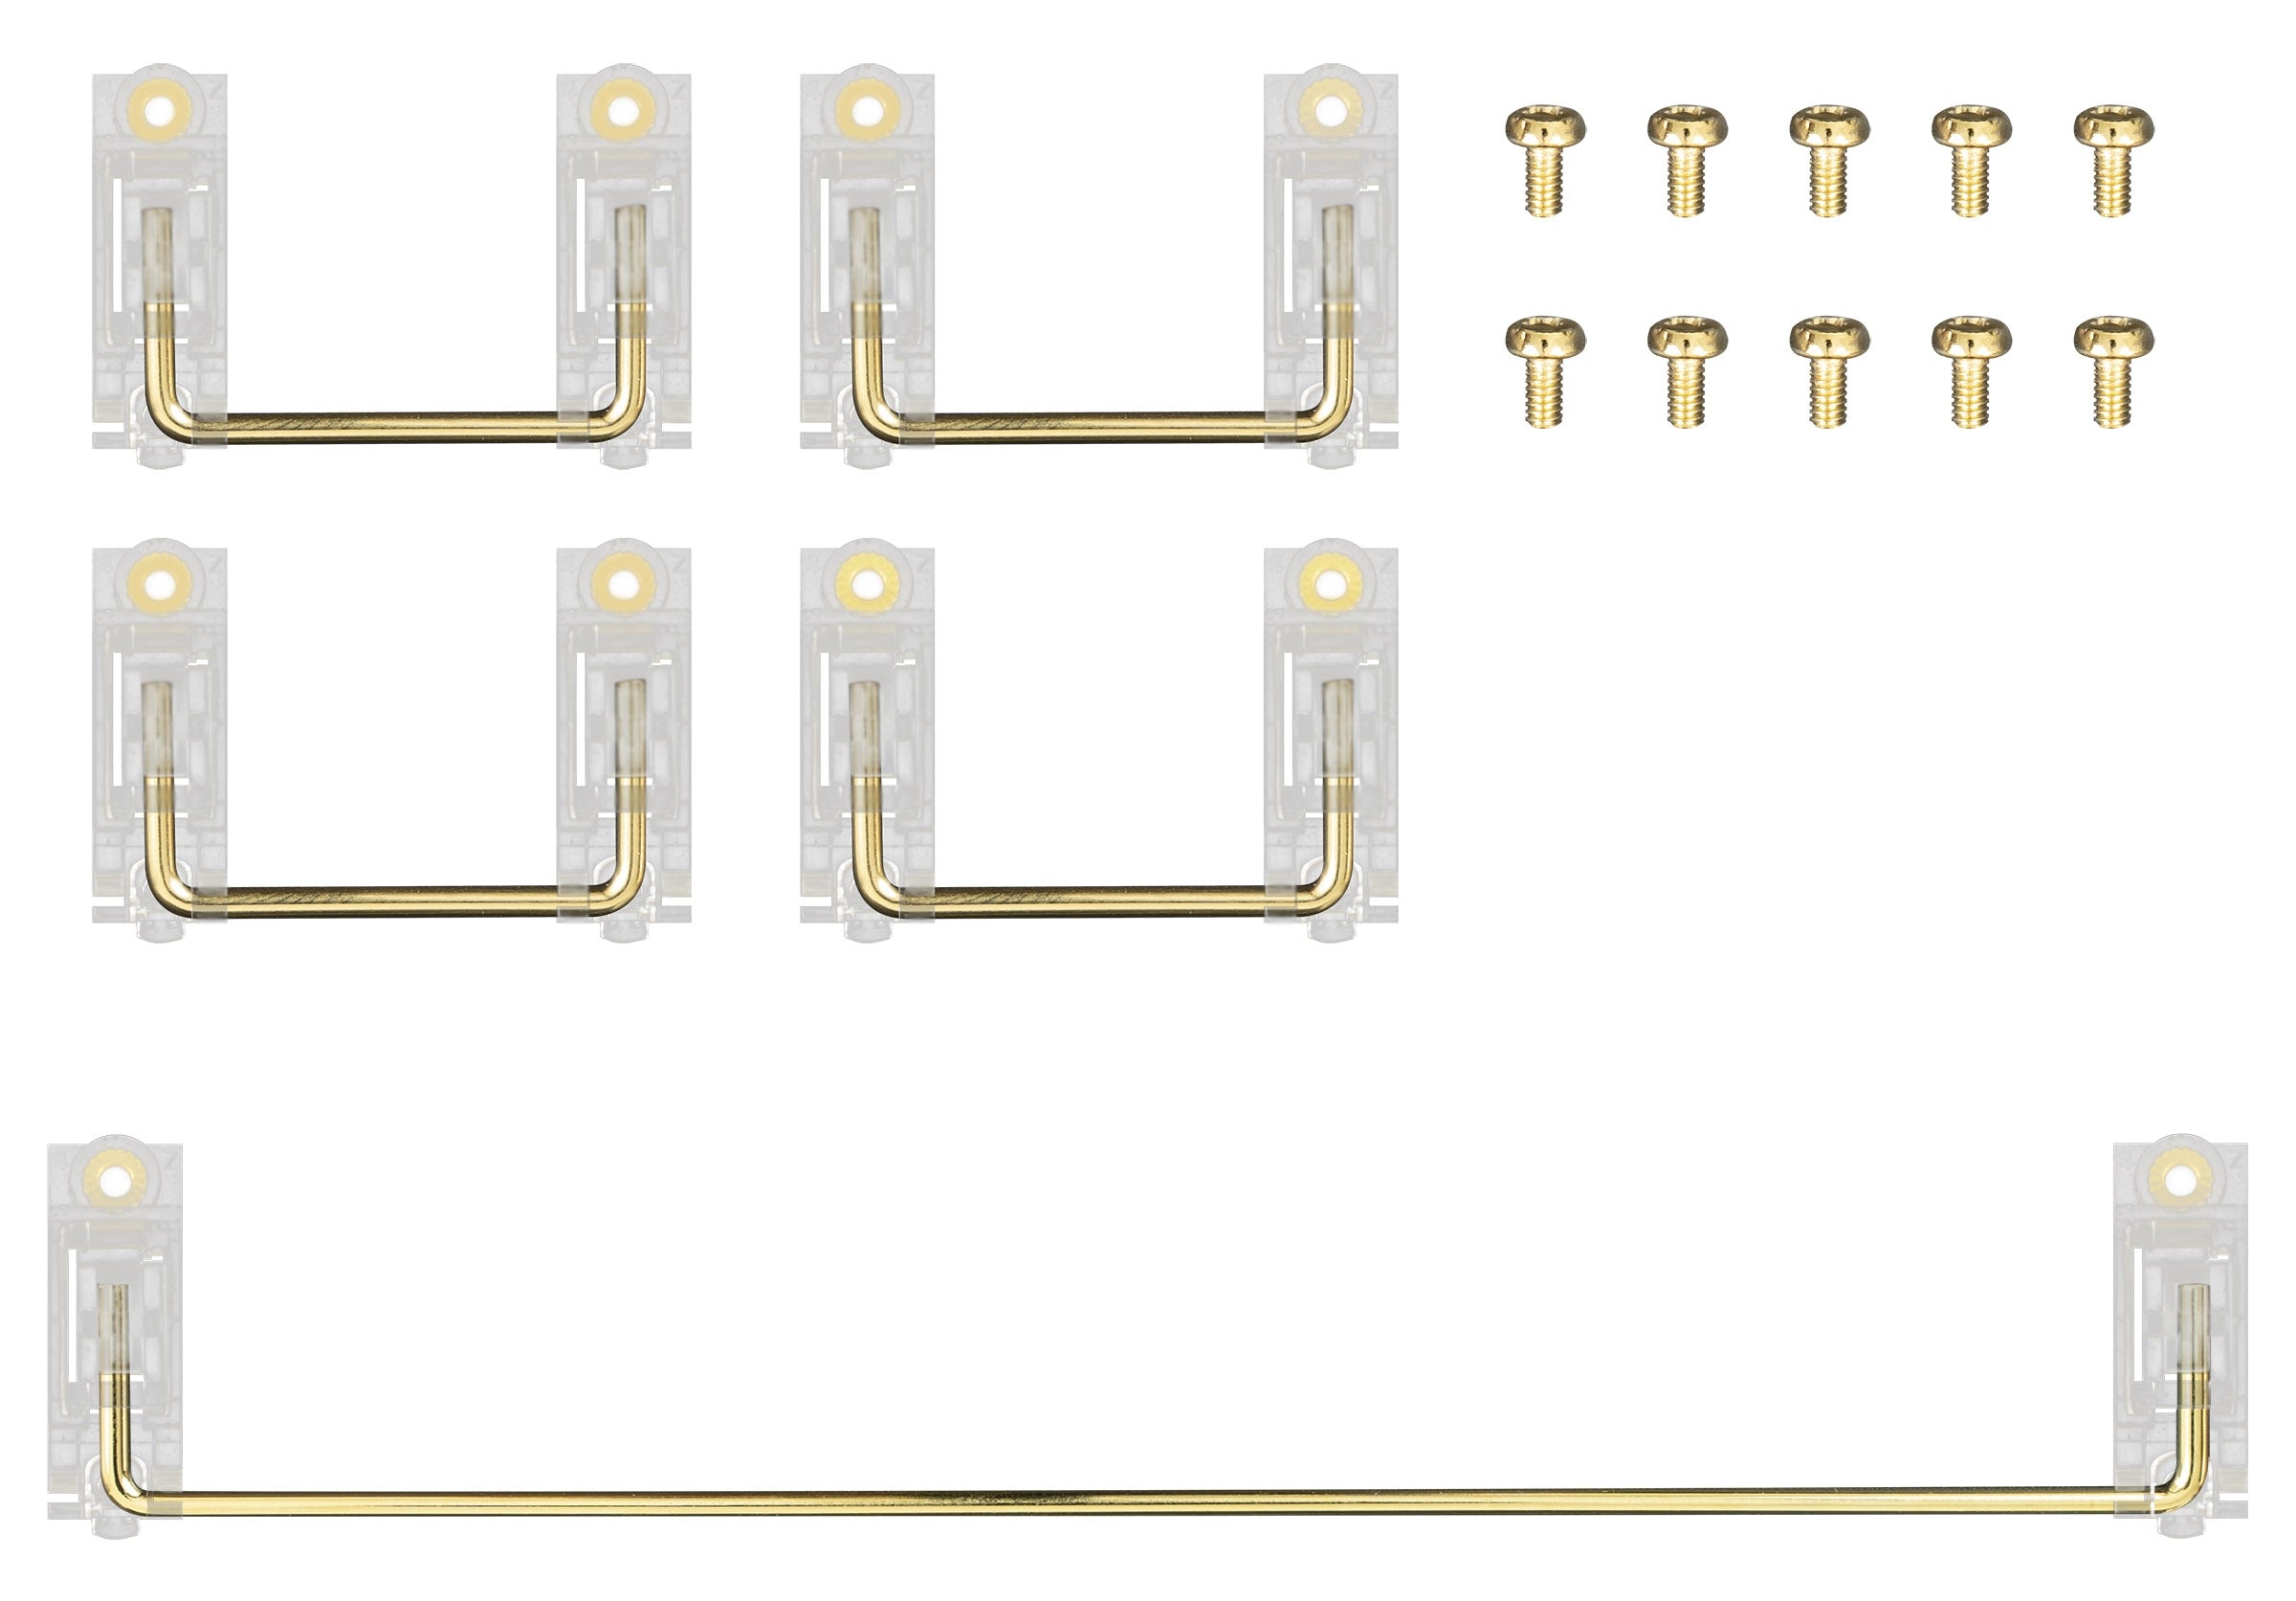 Zeal PC Zeal Stabilizers V2- Clear Gold Plated PCB Screw-in 7u Kit MK8WQSZKQ4 |0|